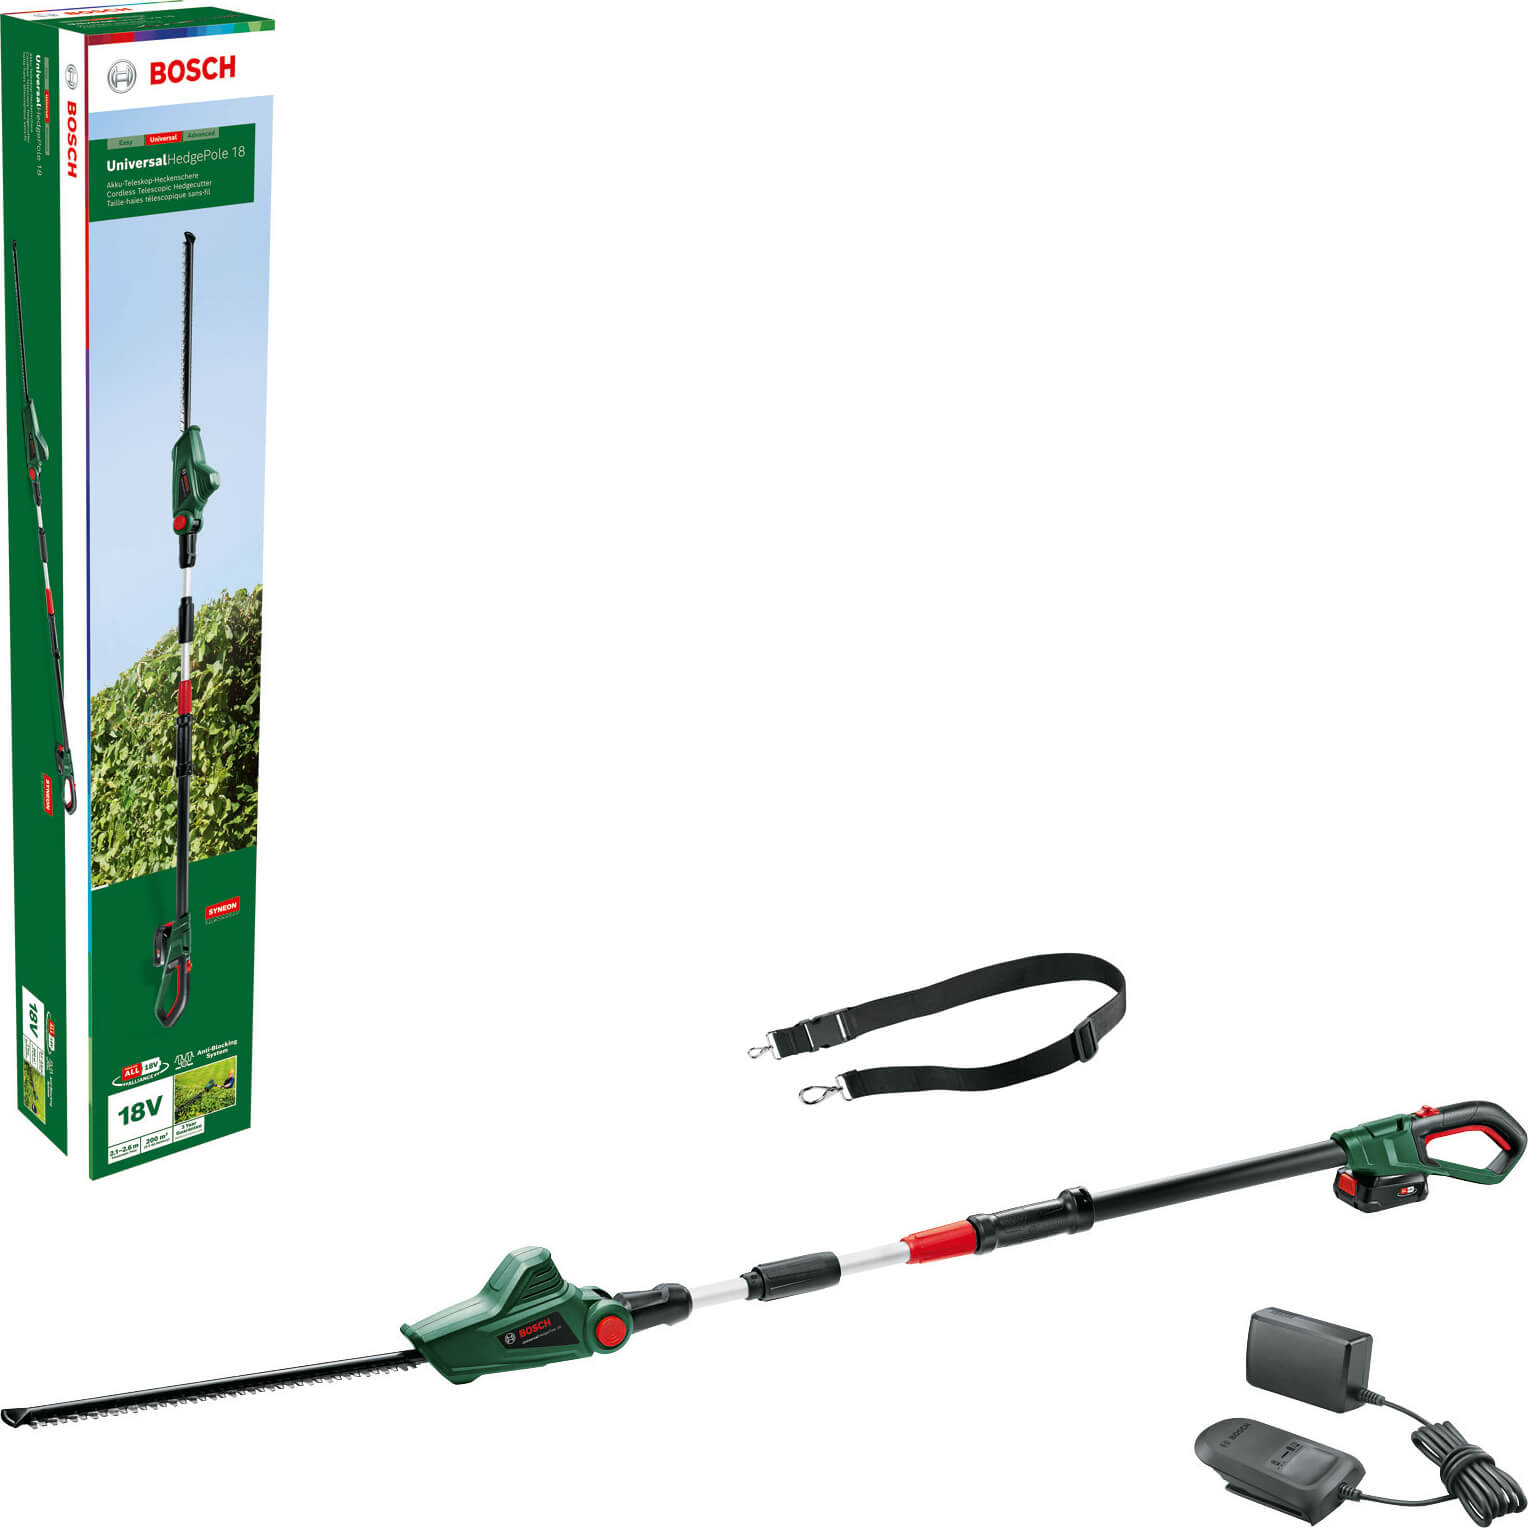 Bosch UNIVERSALHEDGEPOLE P4A 18v Cordless Telescopic Pole Hedge Trimmer 430mm 1 x 2.5ah Li-ion Charger